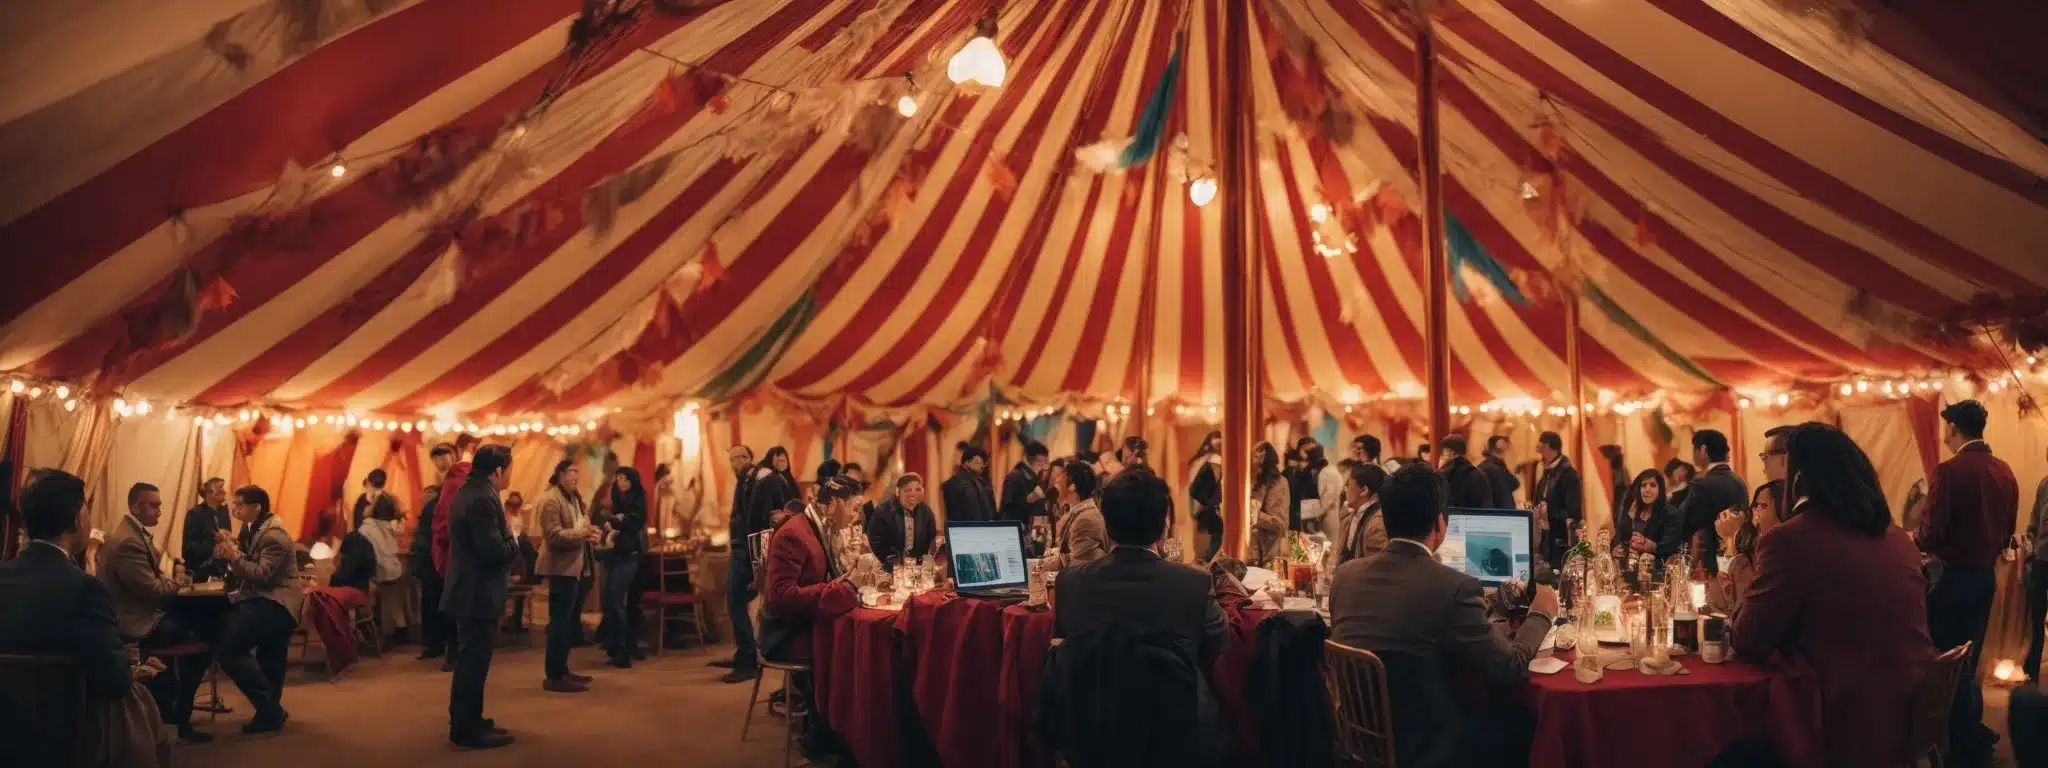 A Bustling Marketing Strategy Meeting Taking Place Within A Vibrant Circus Tent Bustling With Creative Professionals.